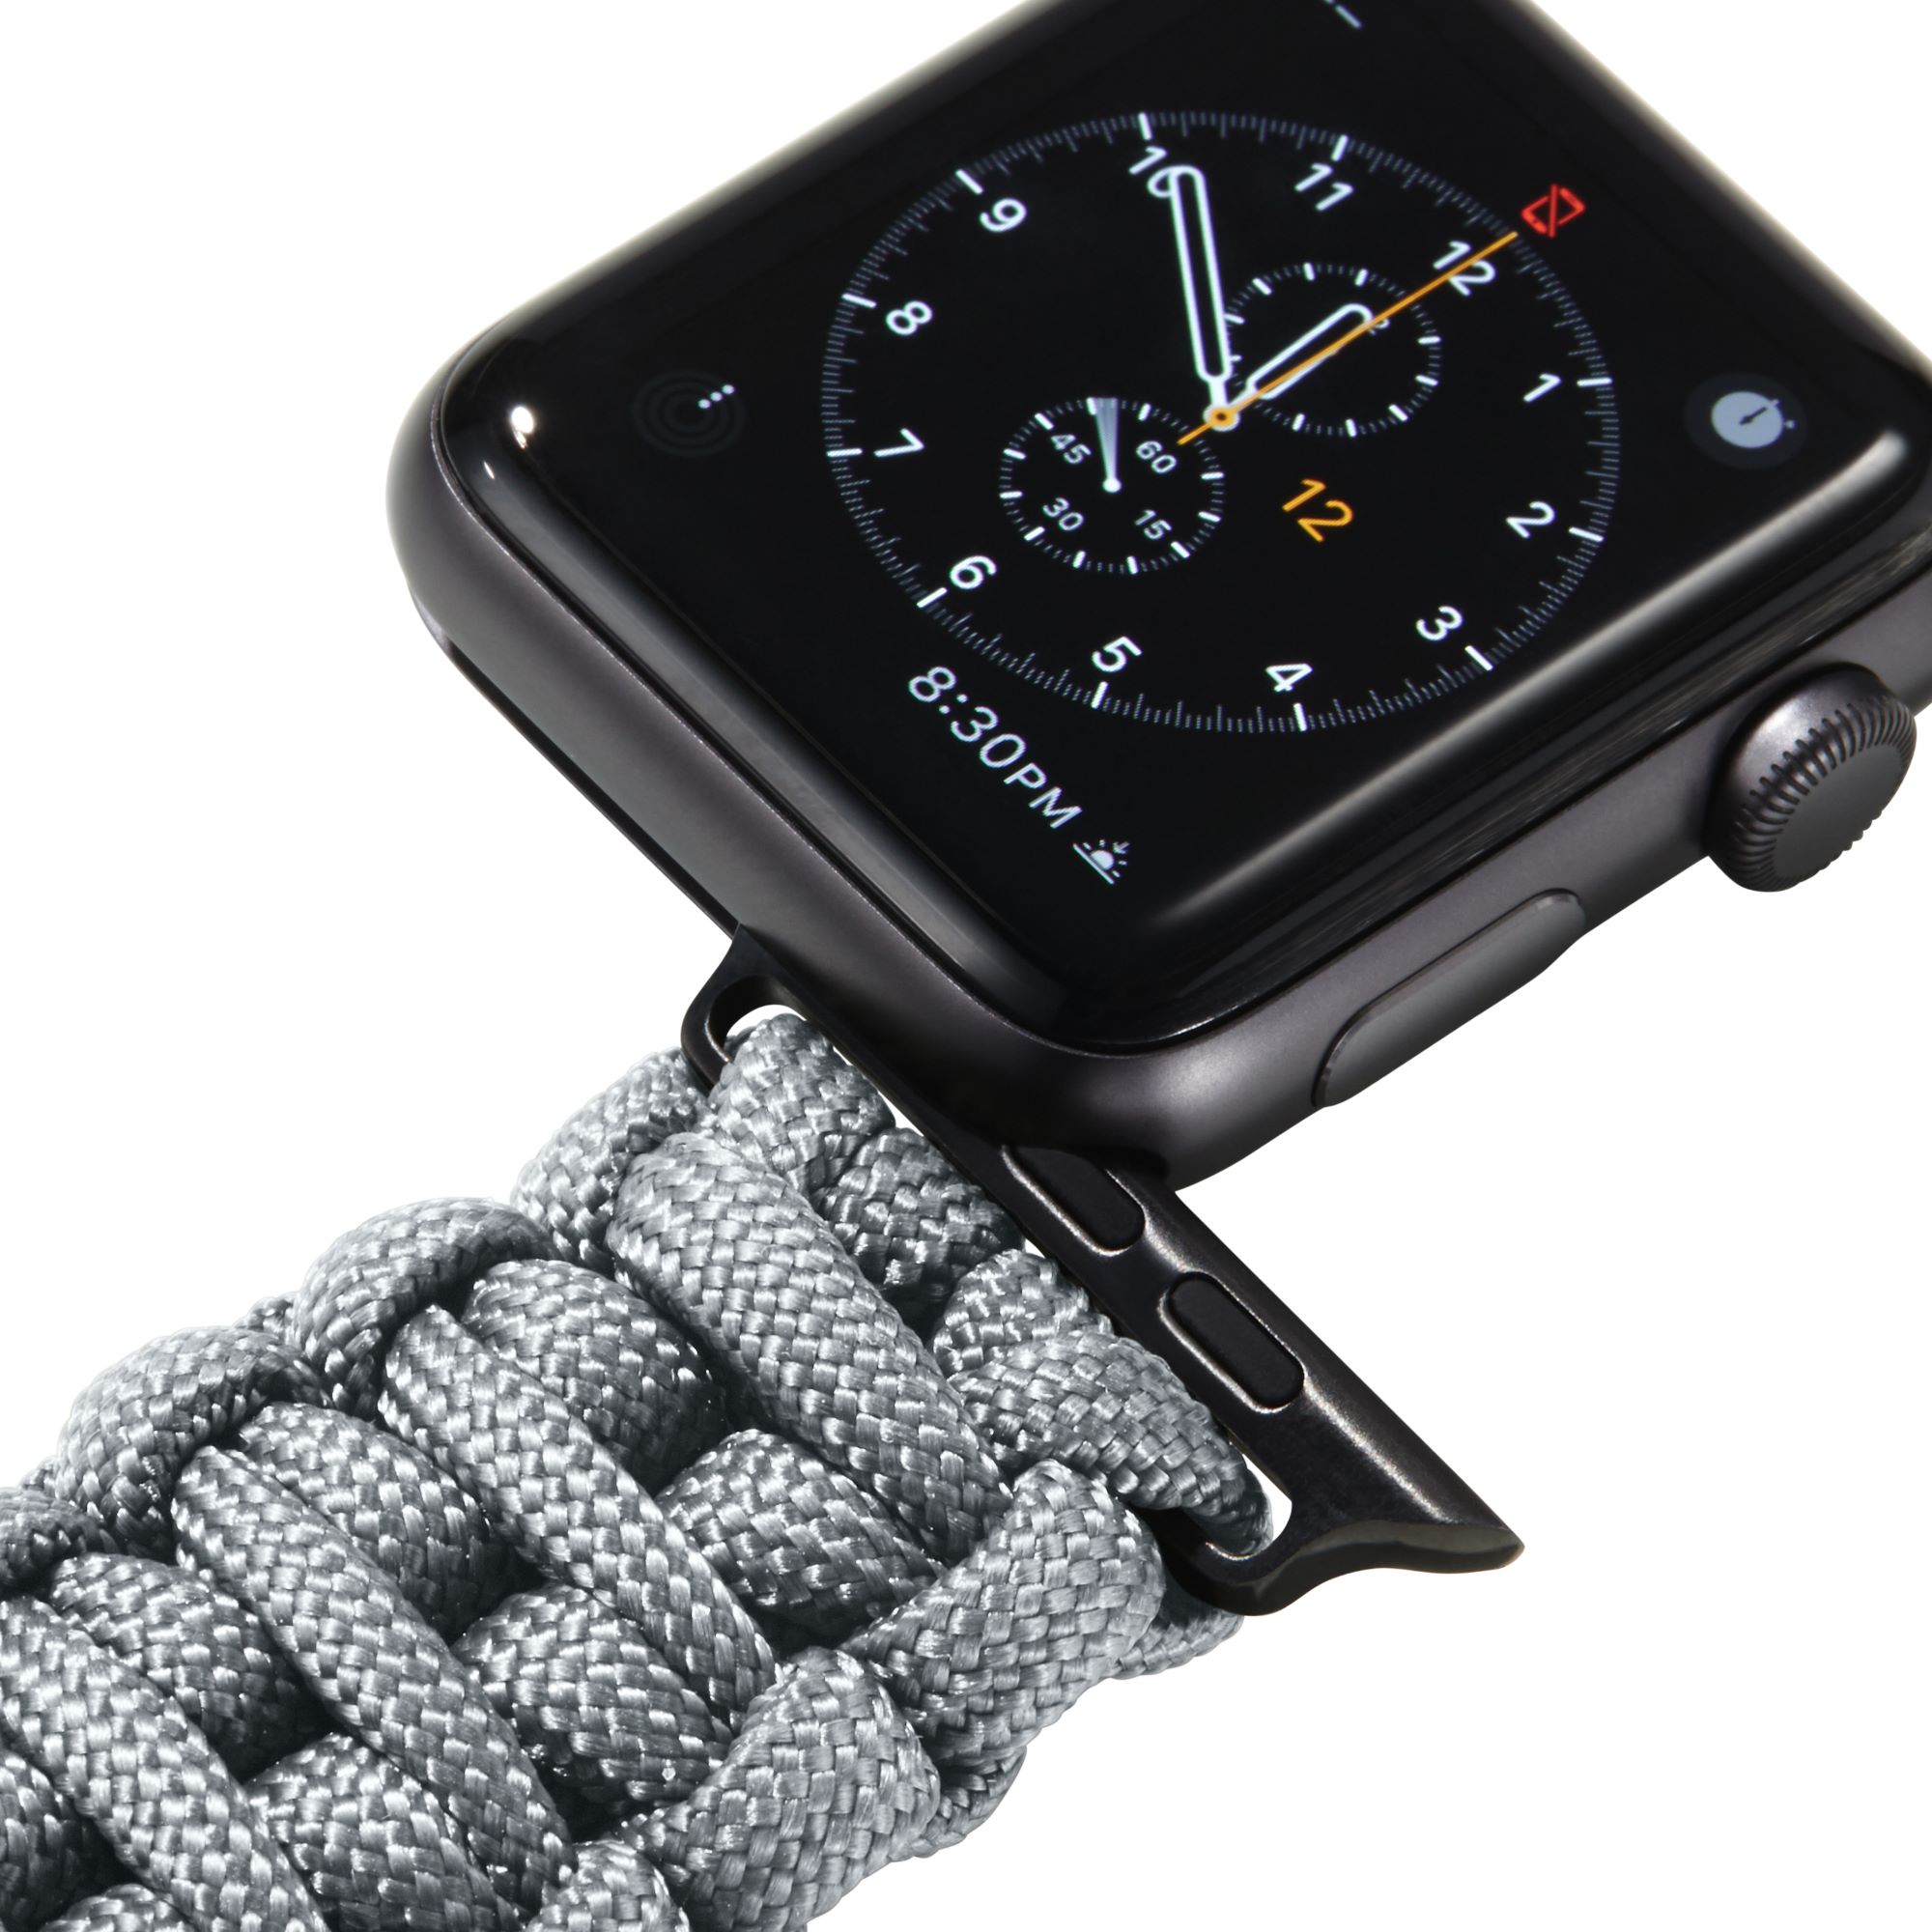 SAVIOR SURVIVAL GEAR Nylon Watch Band Compatible with Apple Watch